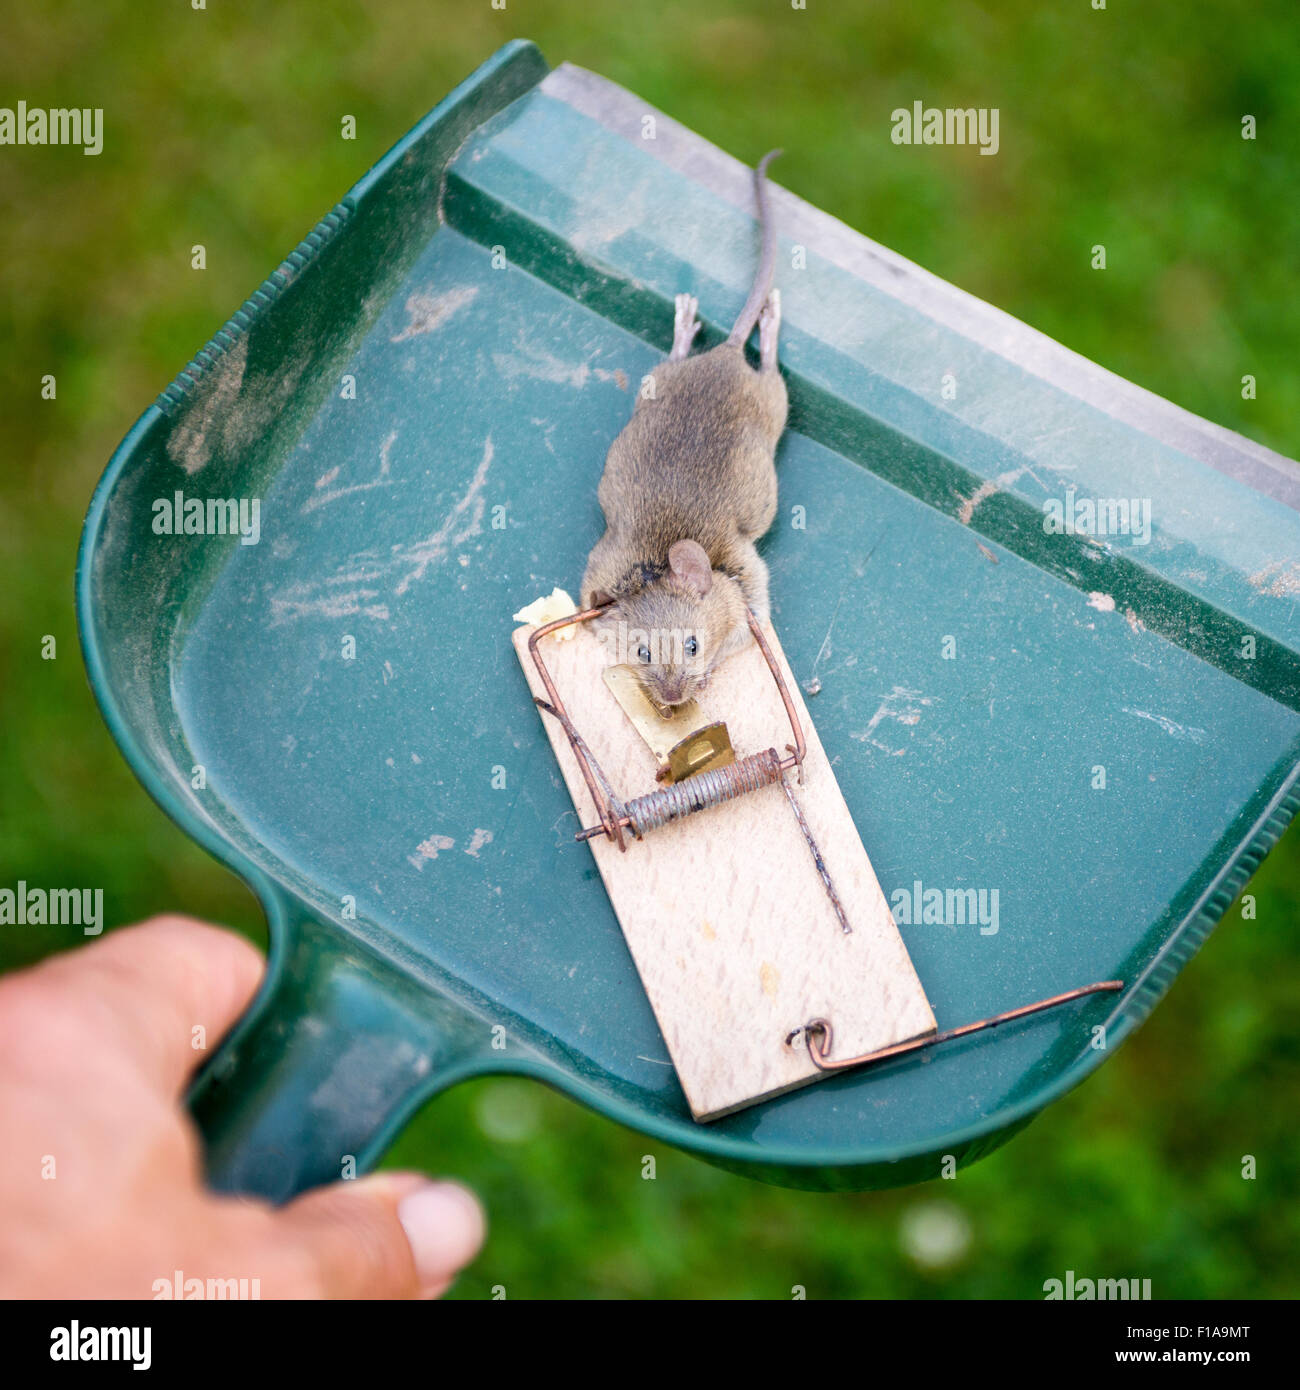 https://c8.alamy.com/comp/F1A9MT/dead-animal-mouse-in-trap-lying-on-green-grass-lawn-garden-park-outside-F1A9MT.jpg